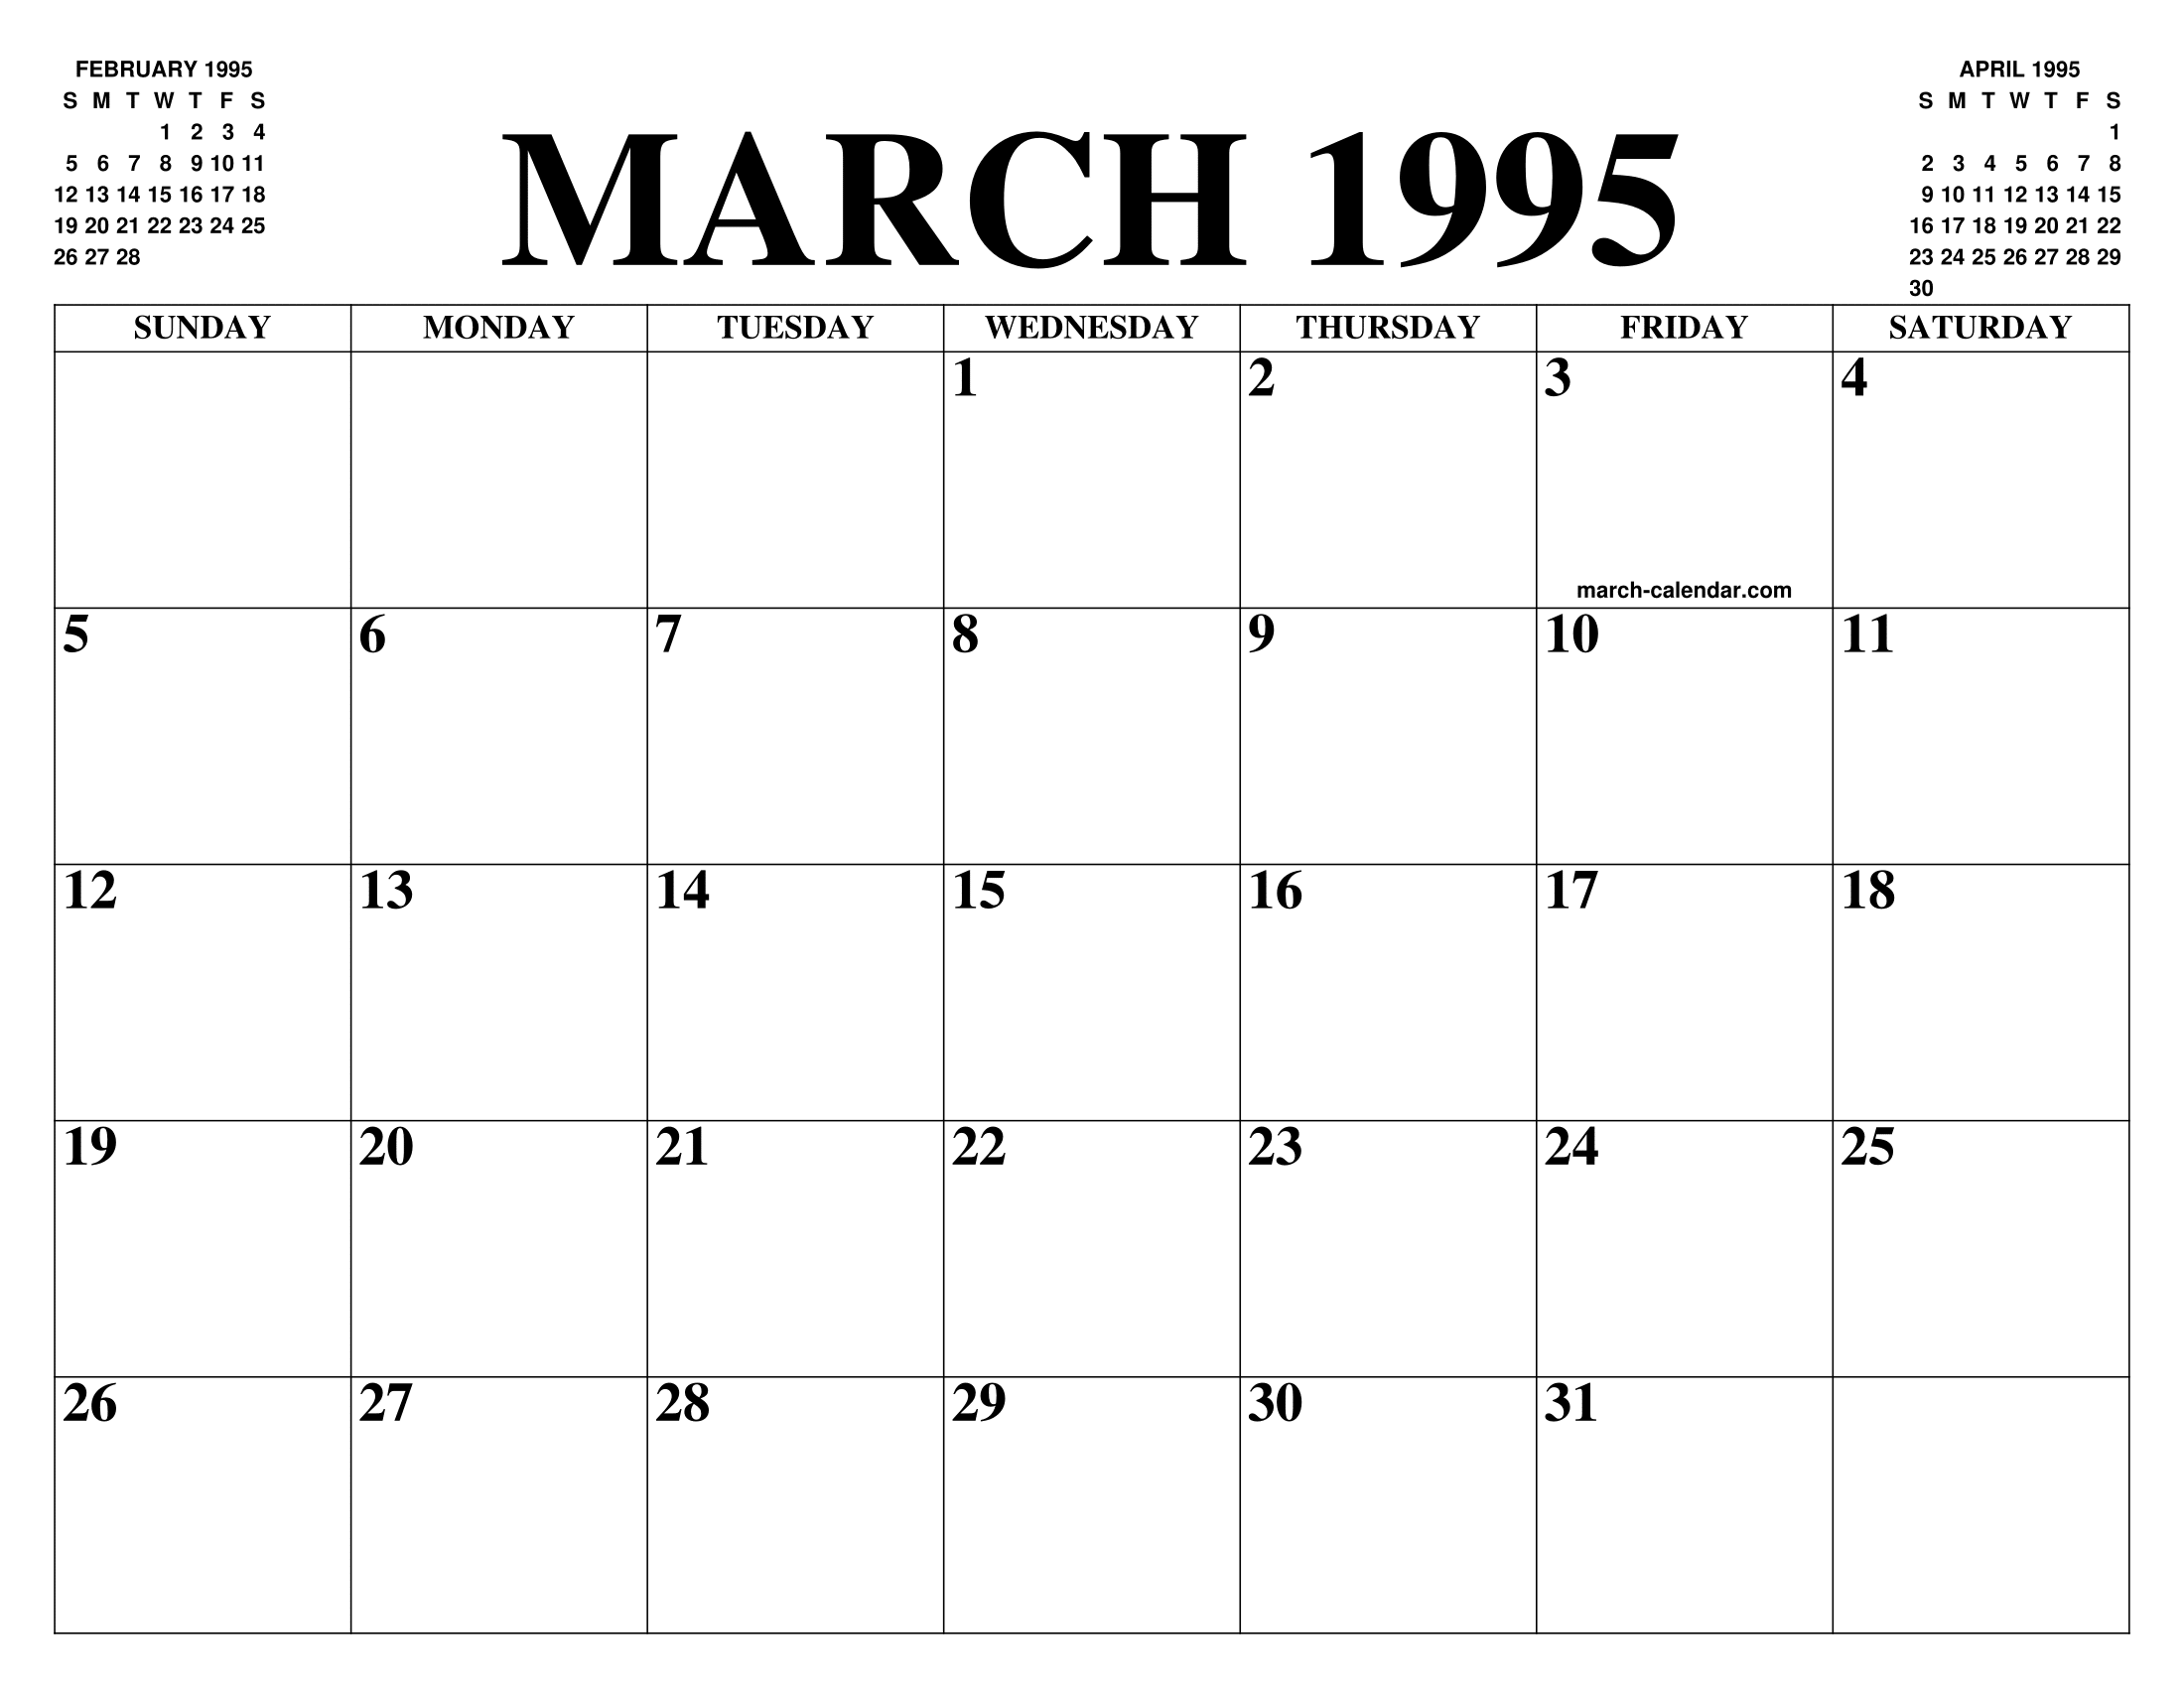 MARCH 1995 CALENDAR OF THE MONTH: FREE PRINTABLE MARCH CALENDAR OF THE